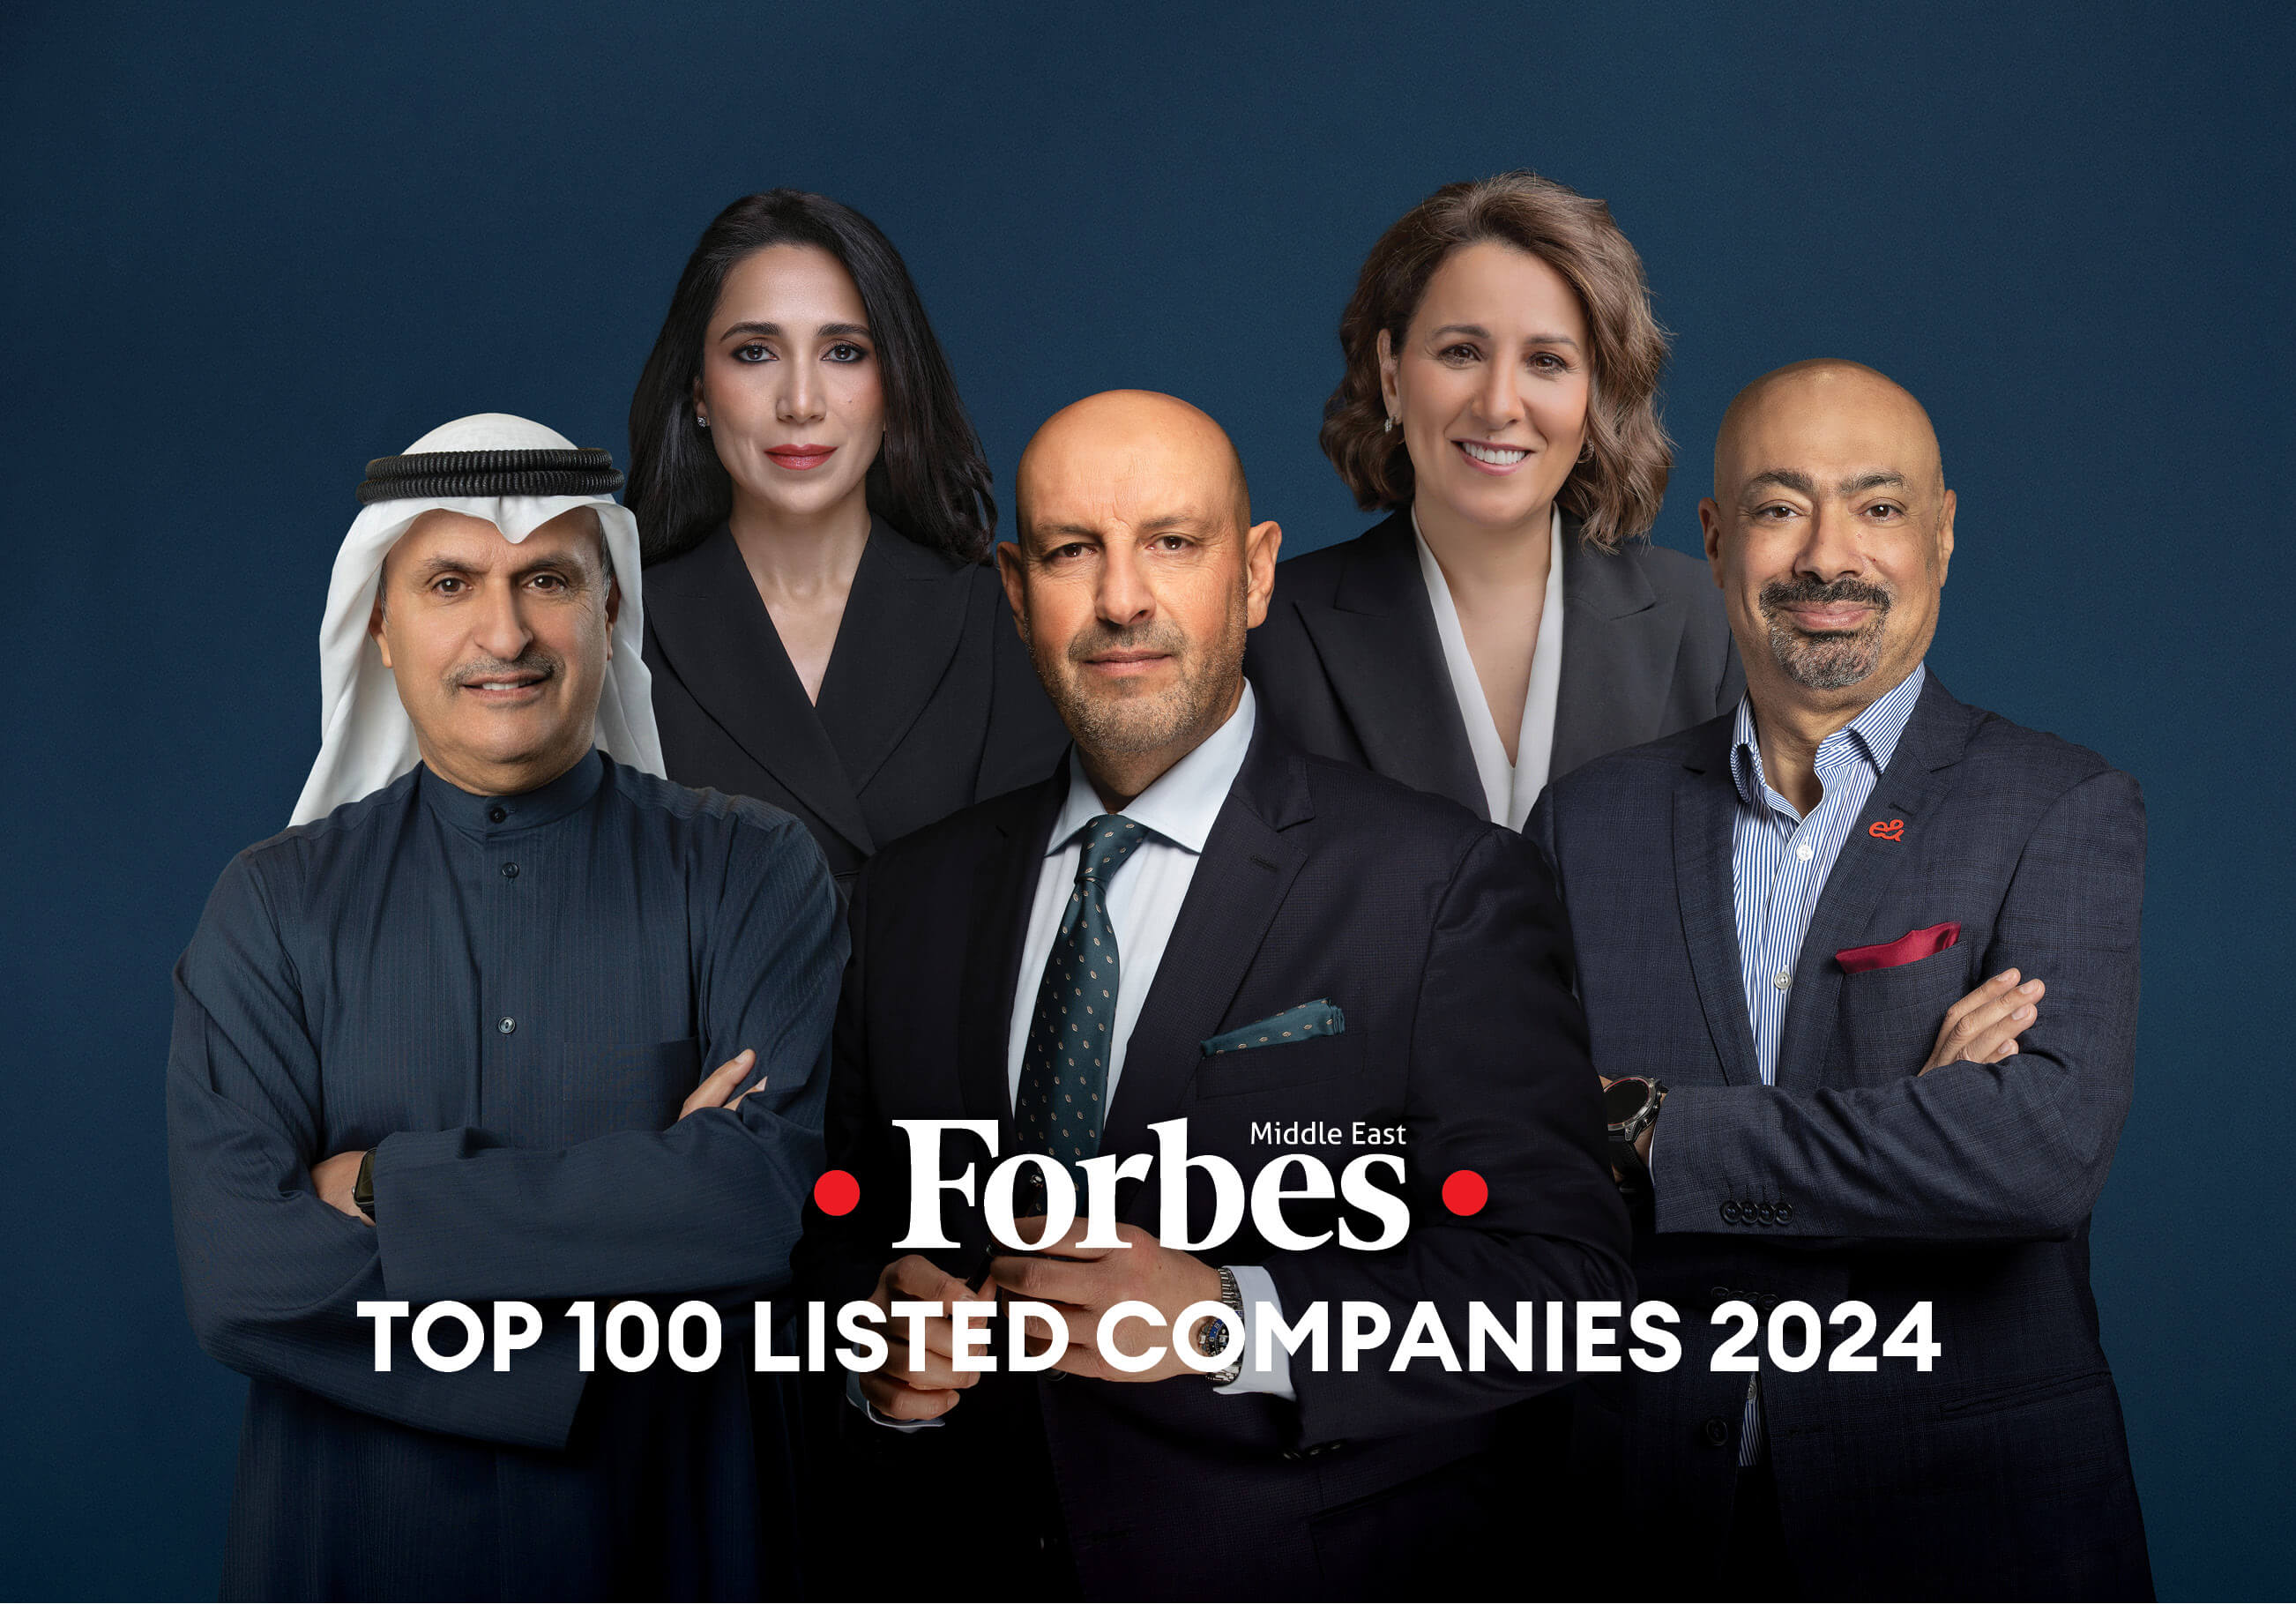 Top 100 Listed Companies 2024